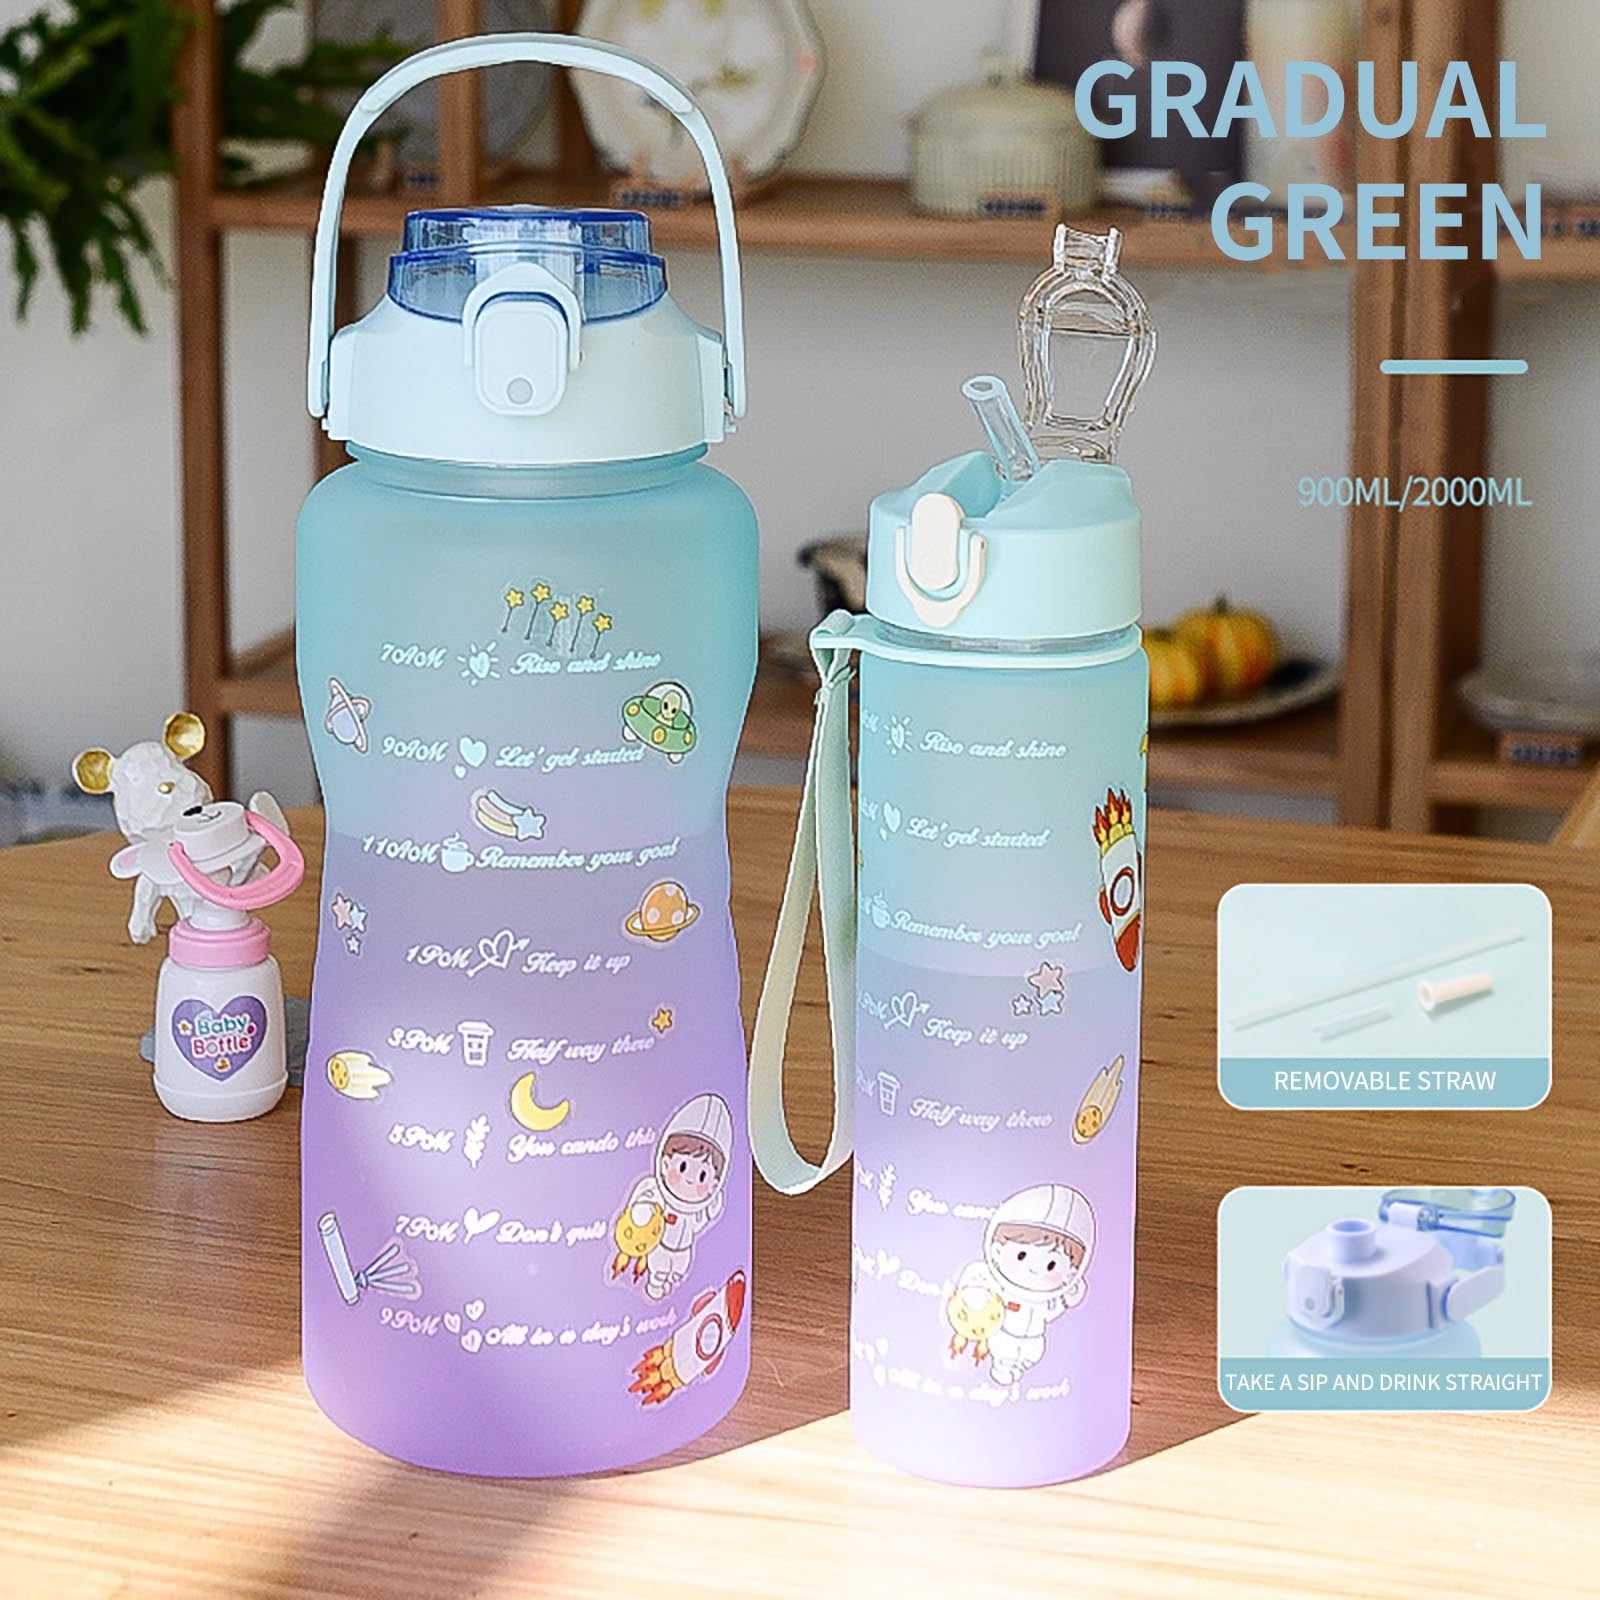  Joywin 2 Liter Water Bottle with Straw Female Girls Large  Portable Travel Bottles Sports Fitness Cup Summer Cold Water with Time  Scale : Sports & Outdoors